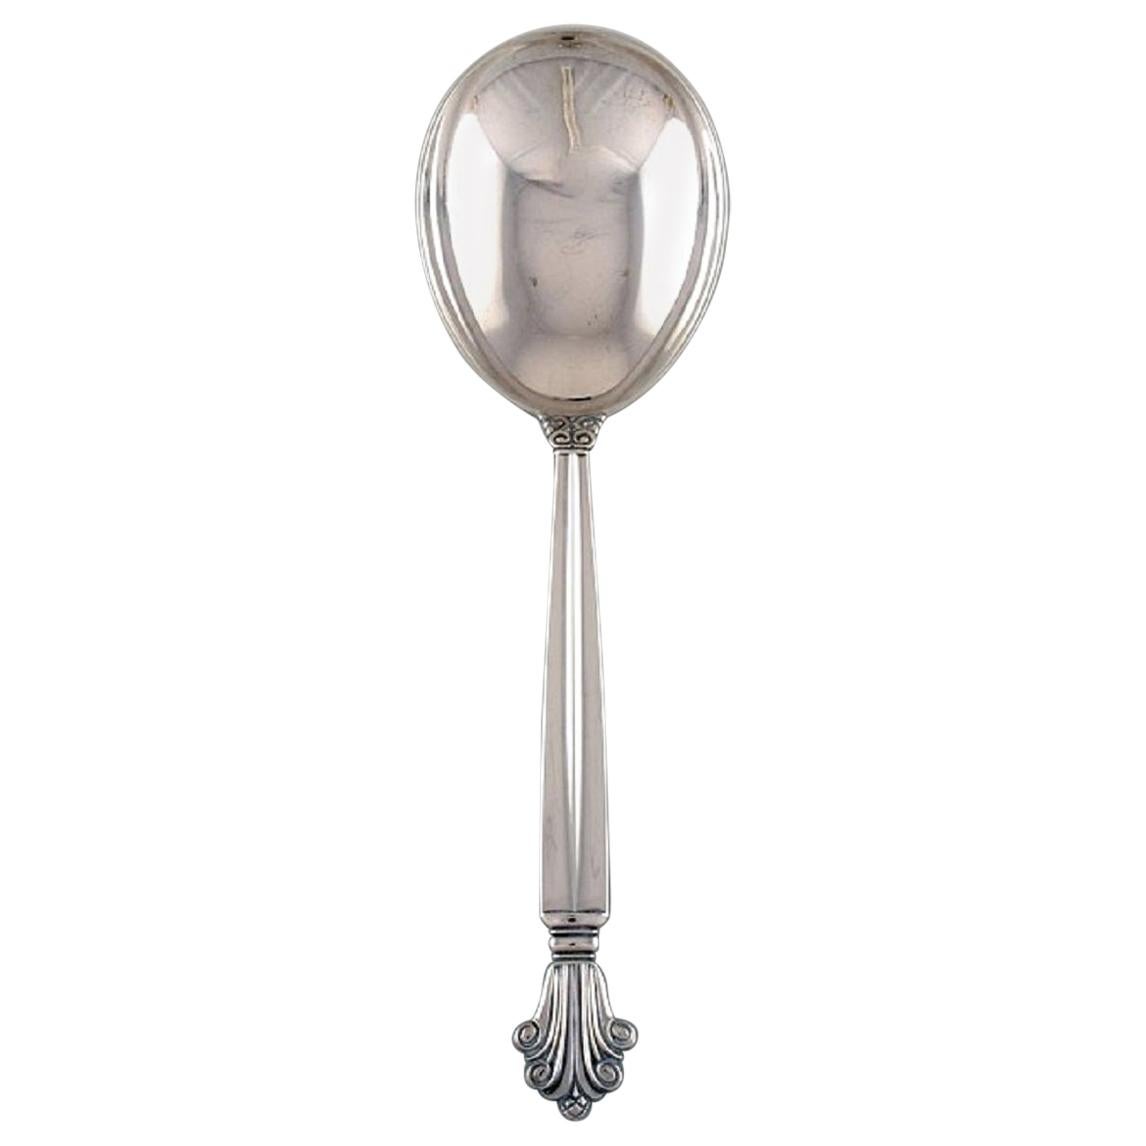 Johan Rohde for Georg Jensen, Acanthus Serving Spoon in Sterling Silver